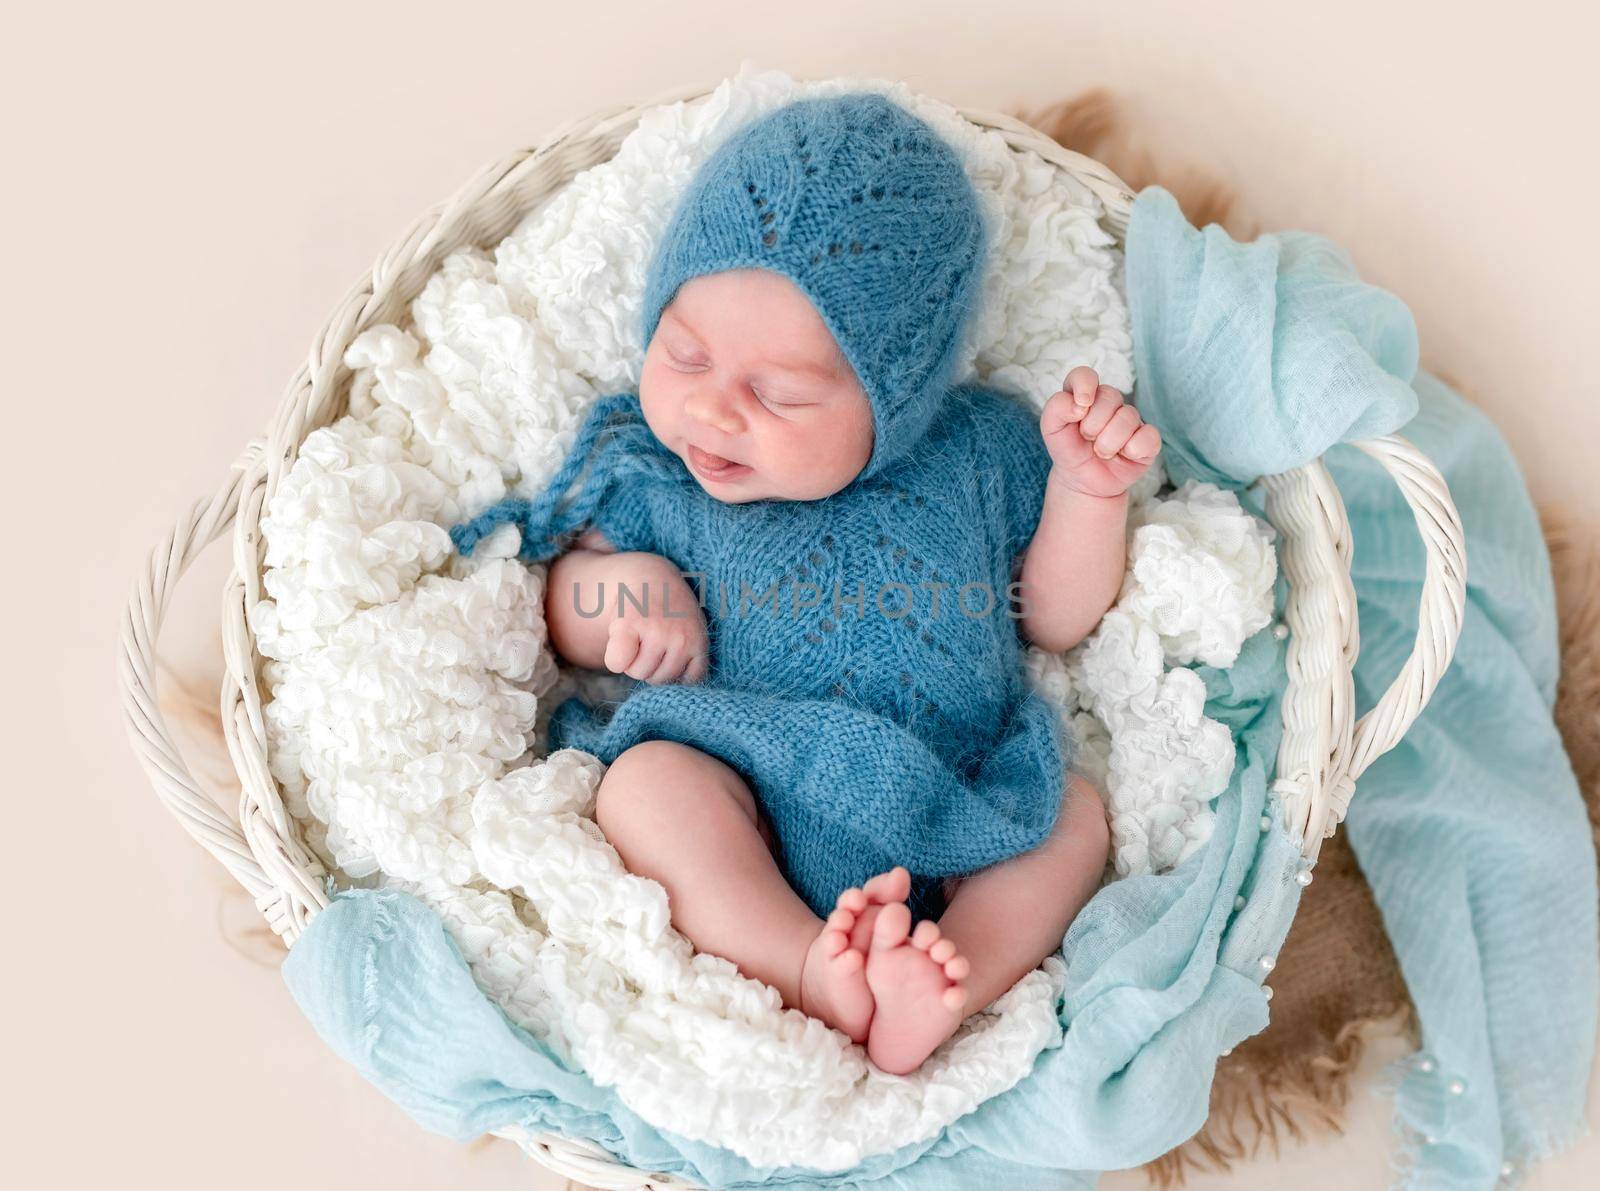 Lovely newborn with tongue out in knitted suit lying in basket